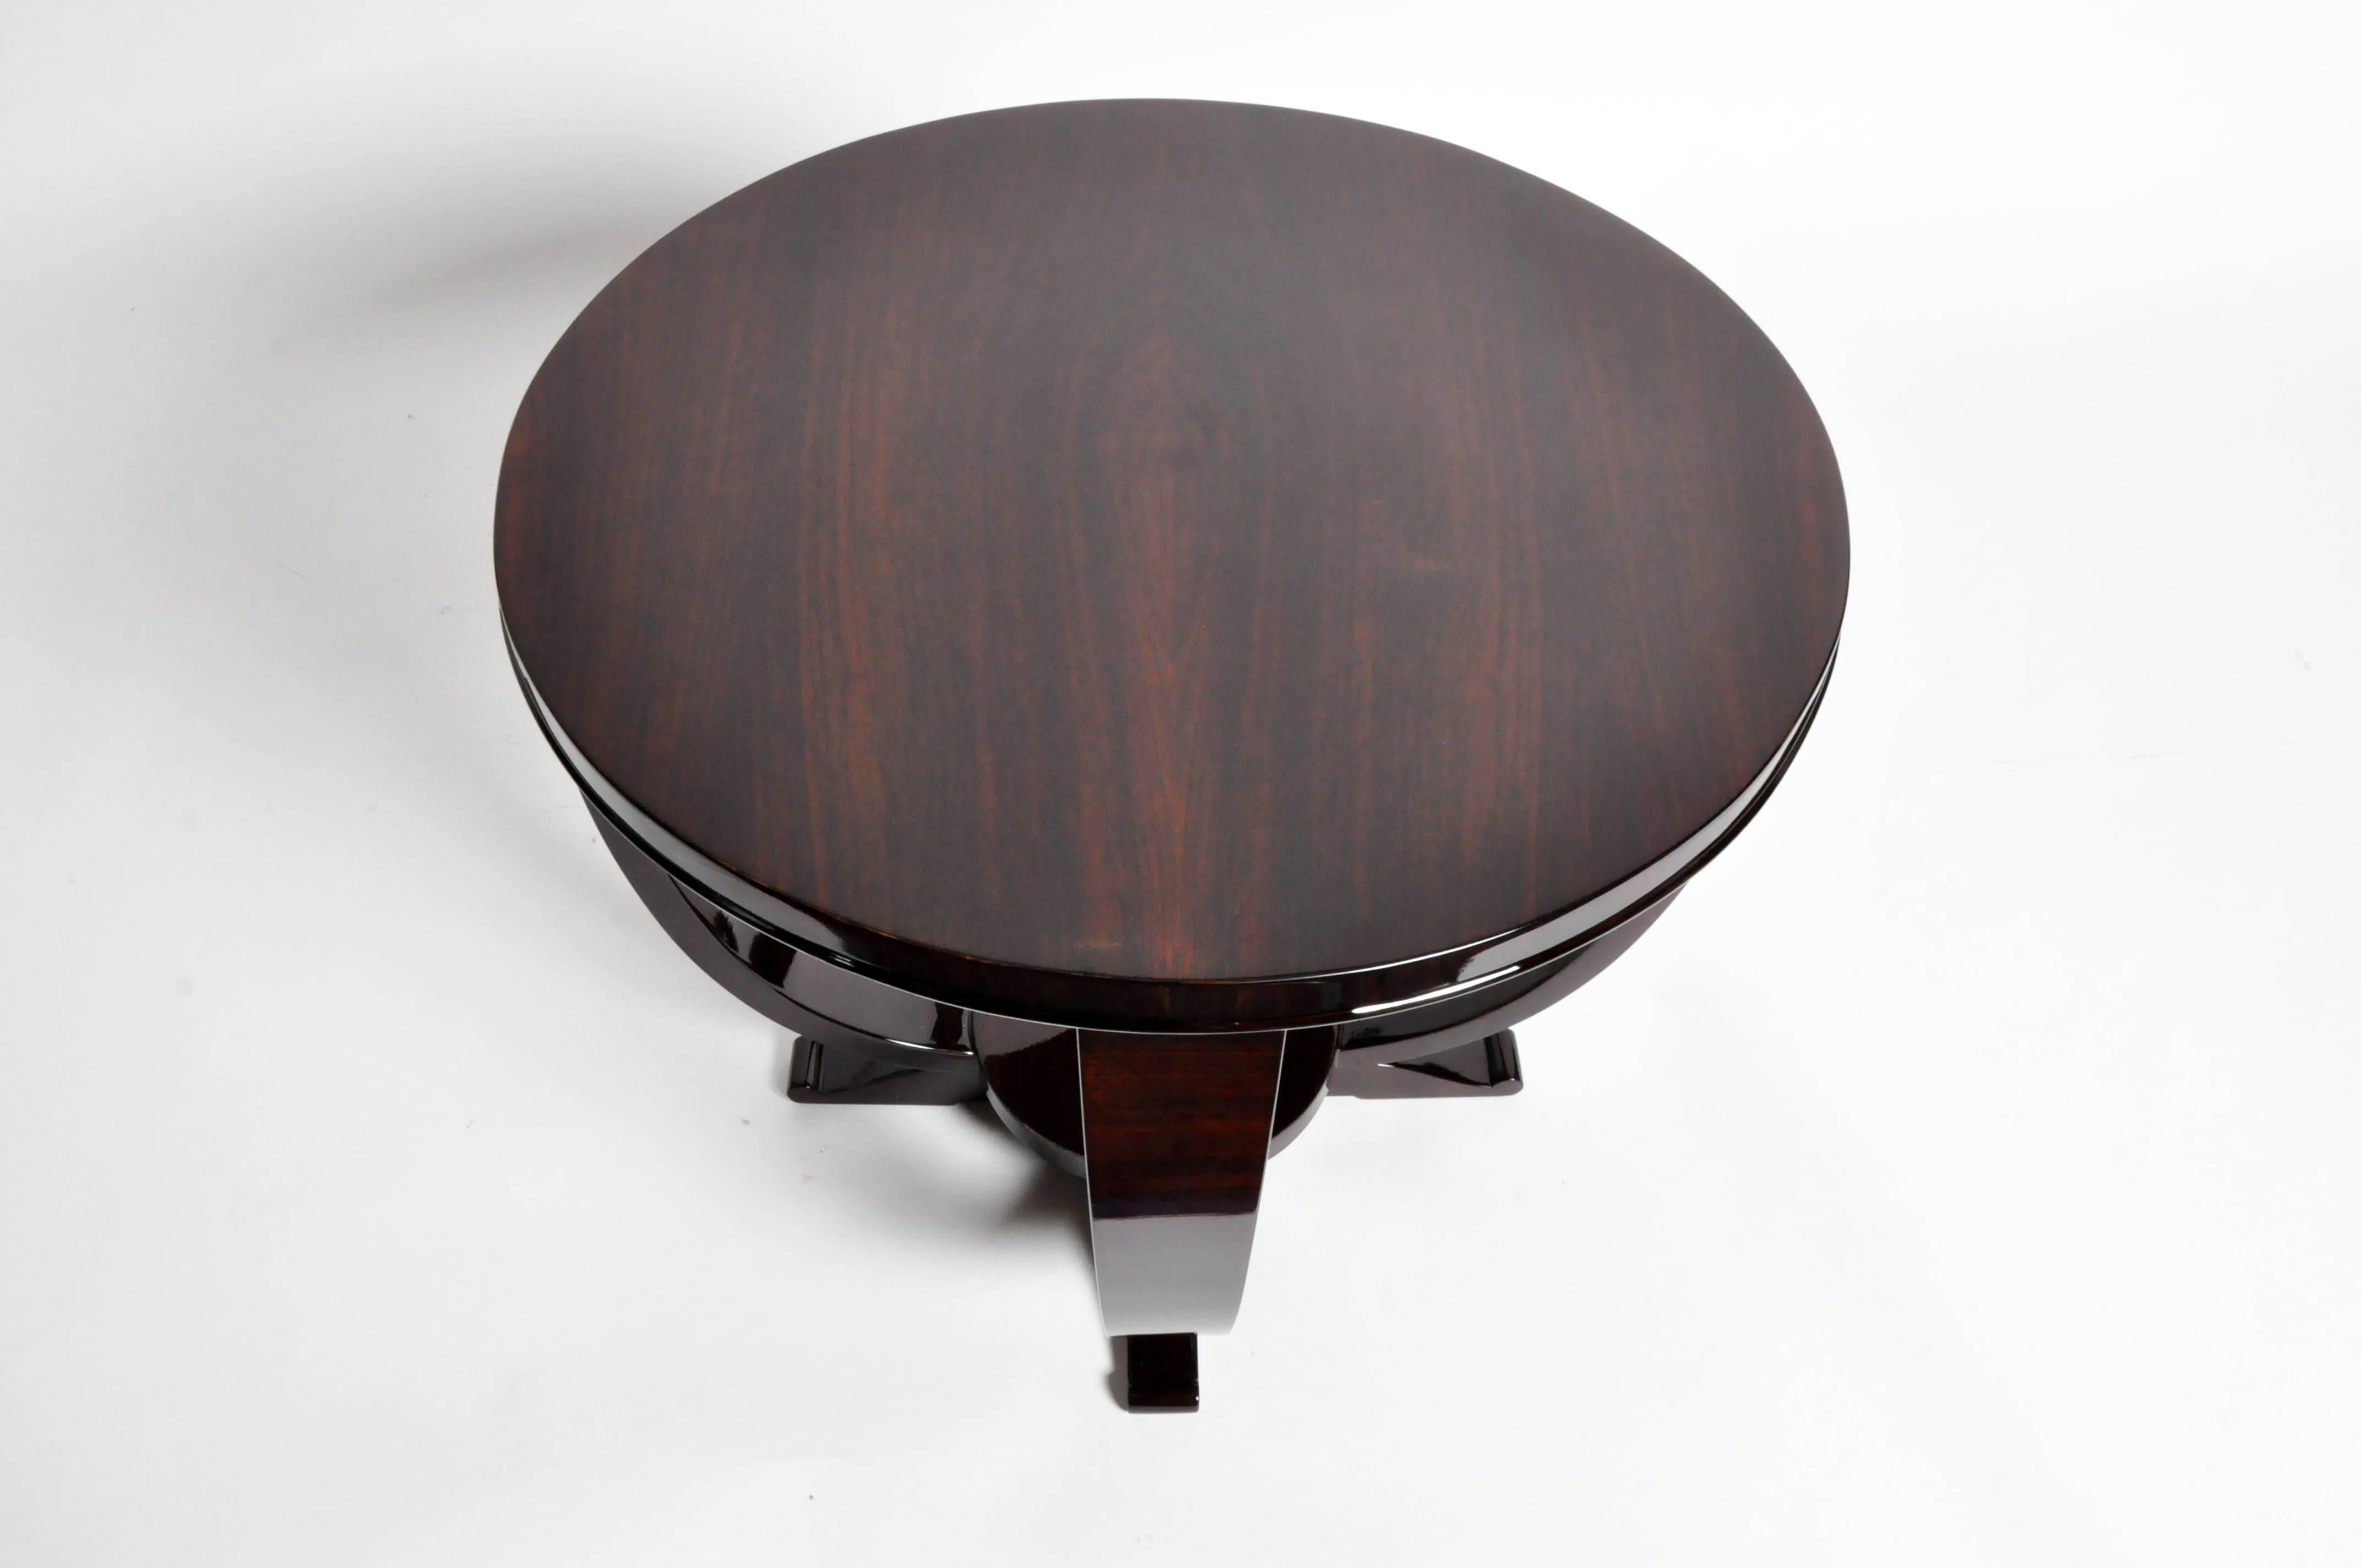 Contemporary Art Deco Style Round Table with Walnut Veneer